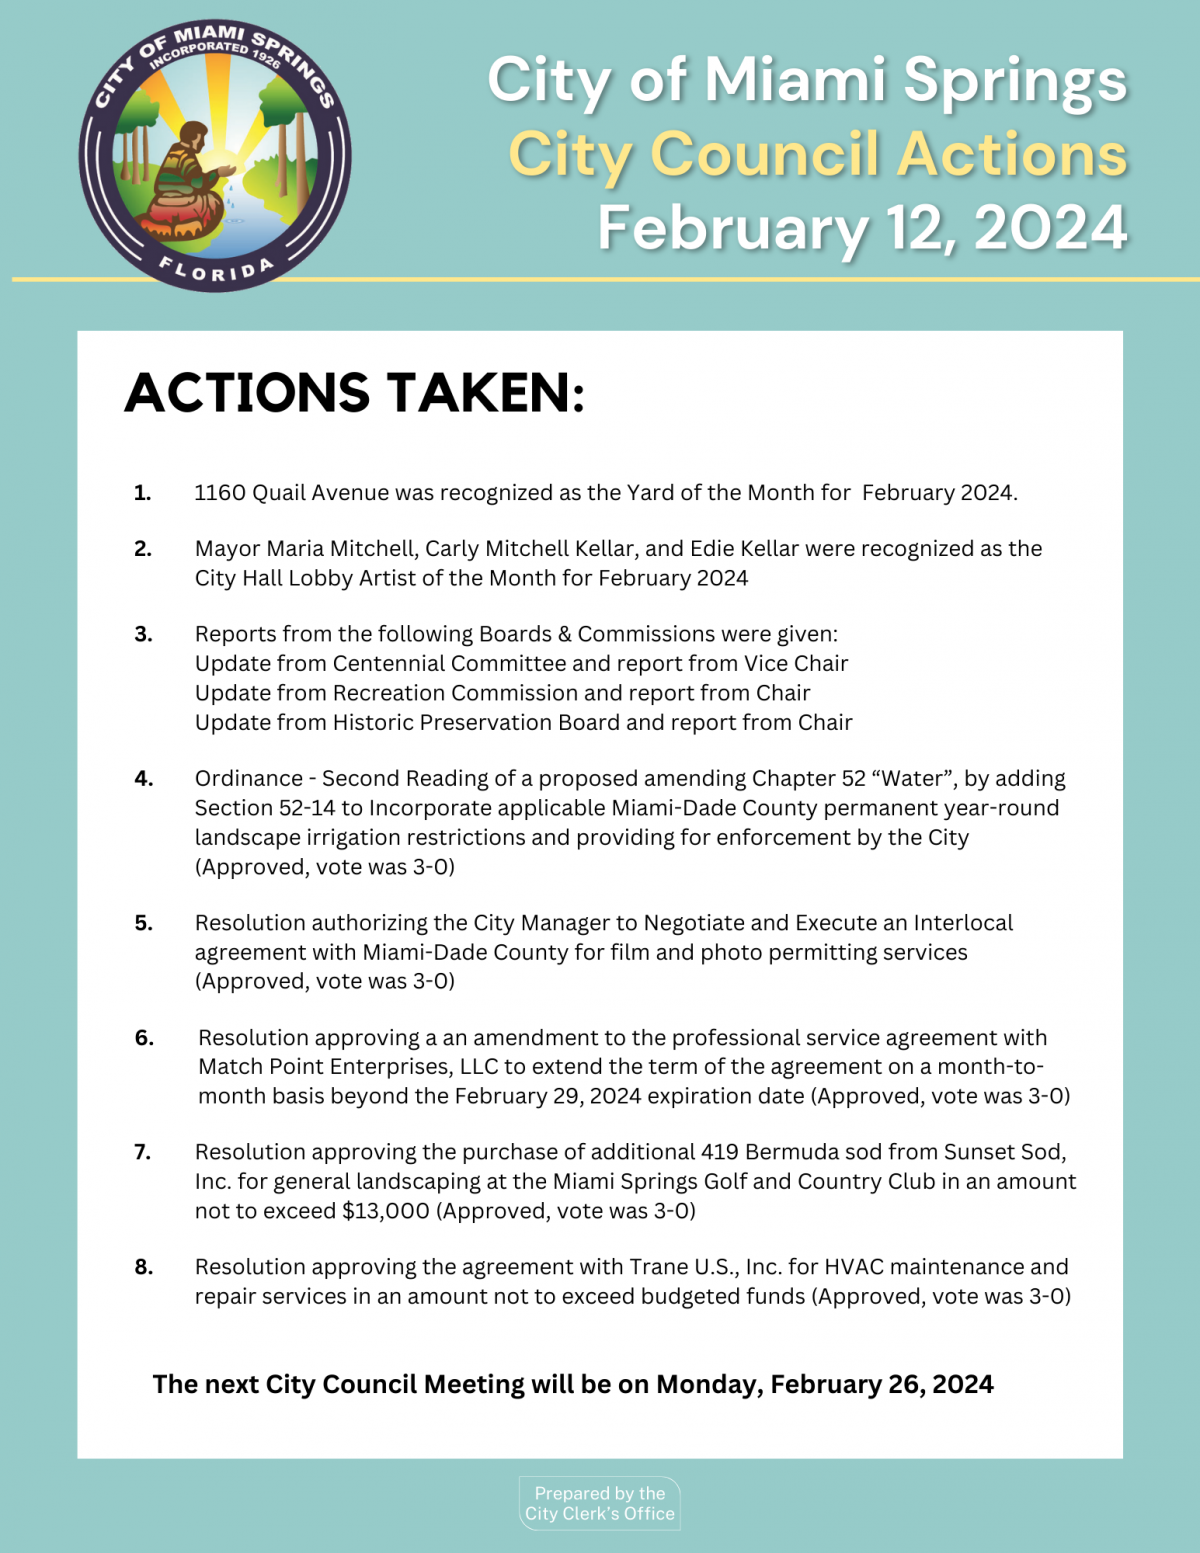 City Council Actions - February 12, 2024